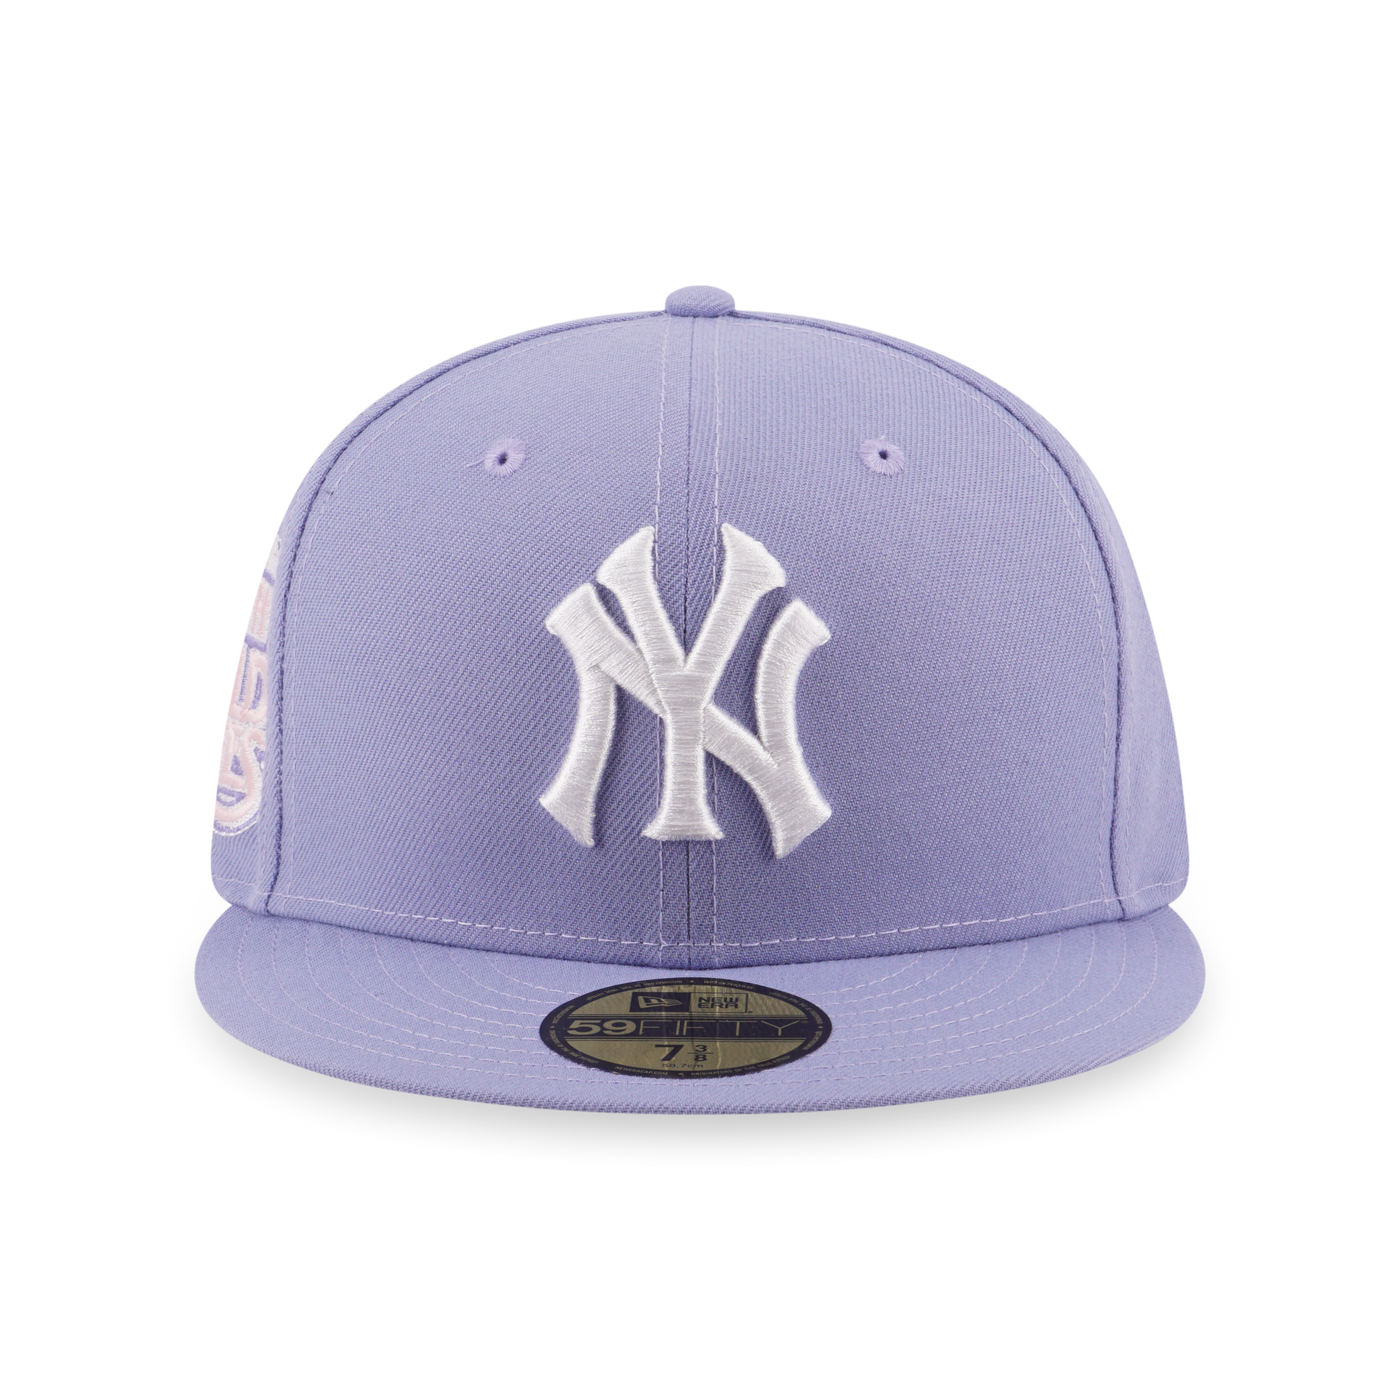 NEW YORK YANKEES 59FIFTY PACK - SUGAR SHACK PASTEL PURPLE 59FIFTY